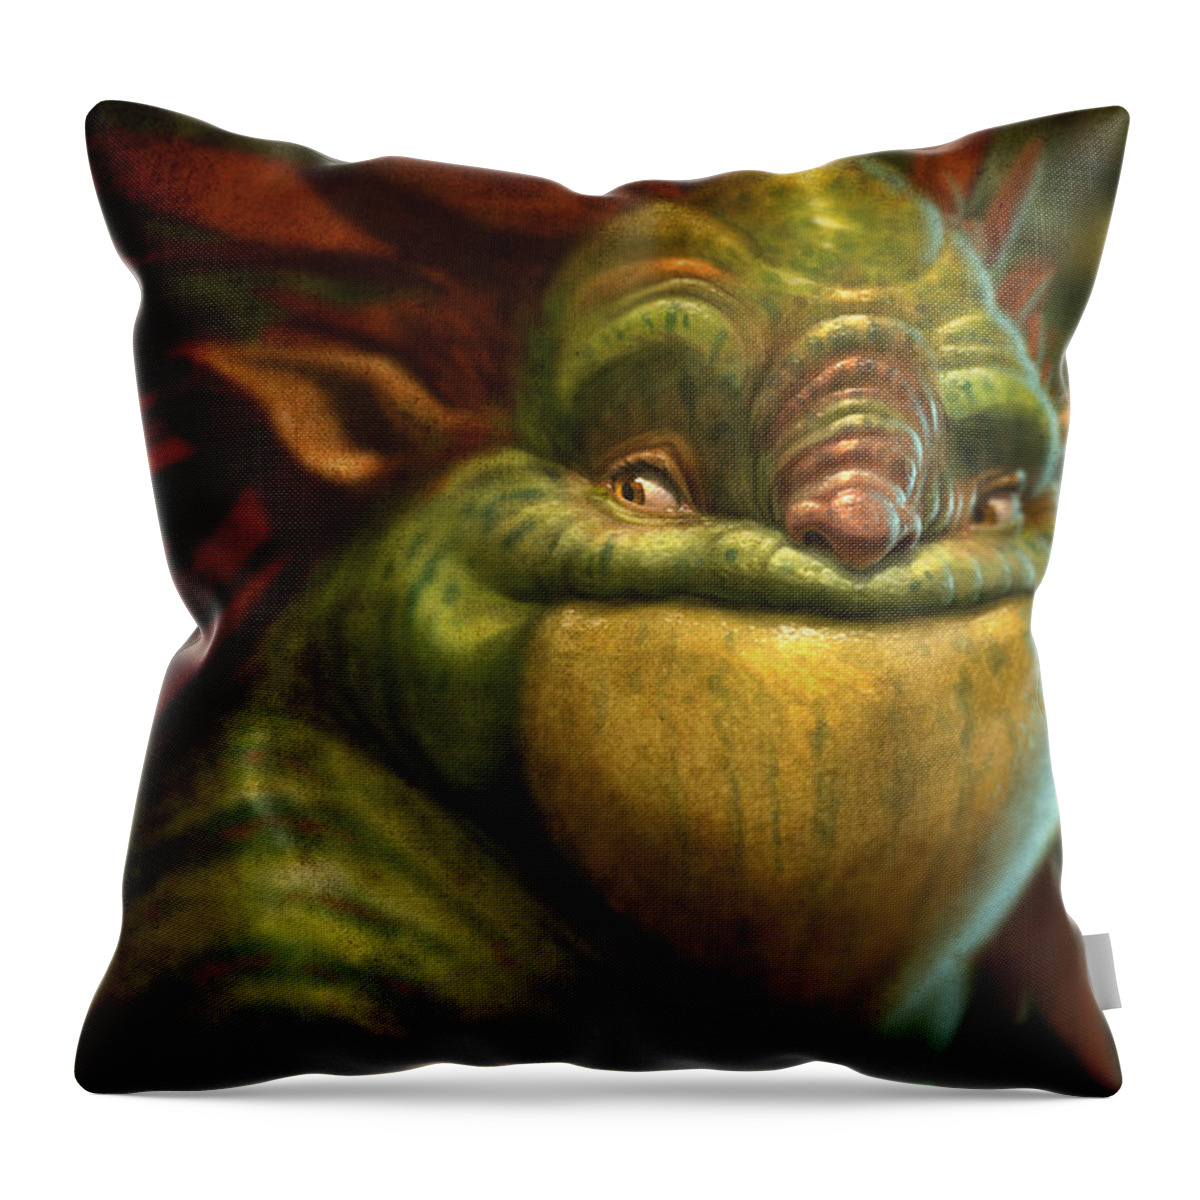 Fantasy Creature Throw Pillow featuring the digital art Frogman by Aaron Blaise